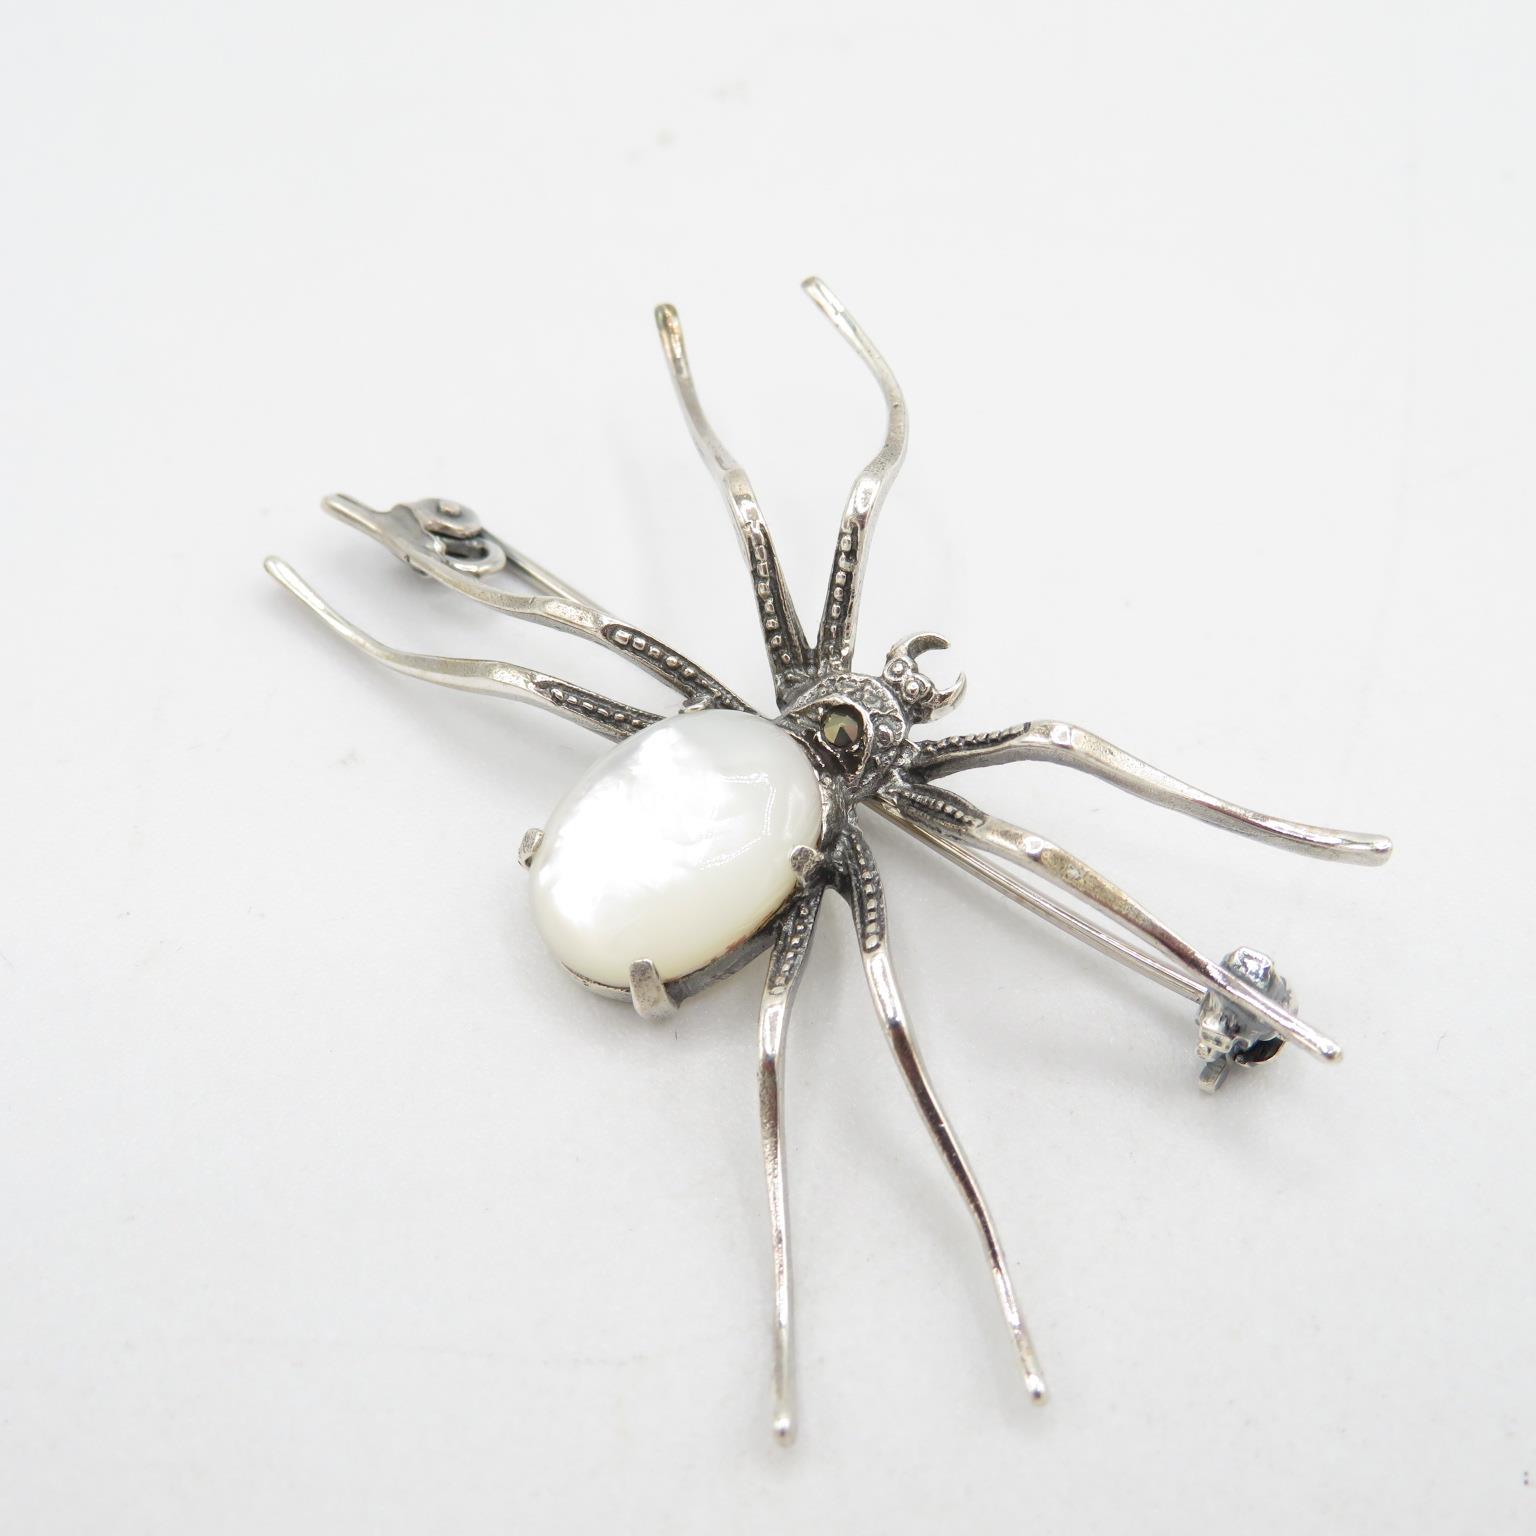 HM 925 Sterling Silver spider brooch with tight fitting bar catch, decorated with milky gemstone ( - Image 2 of 4